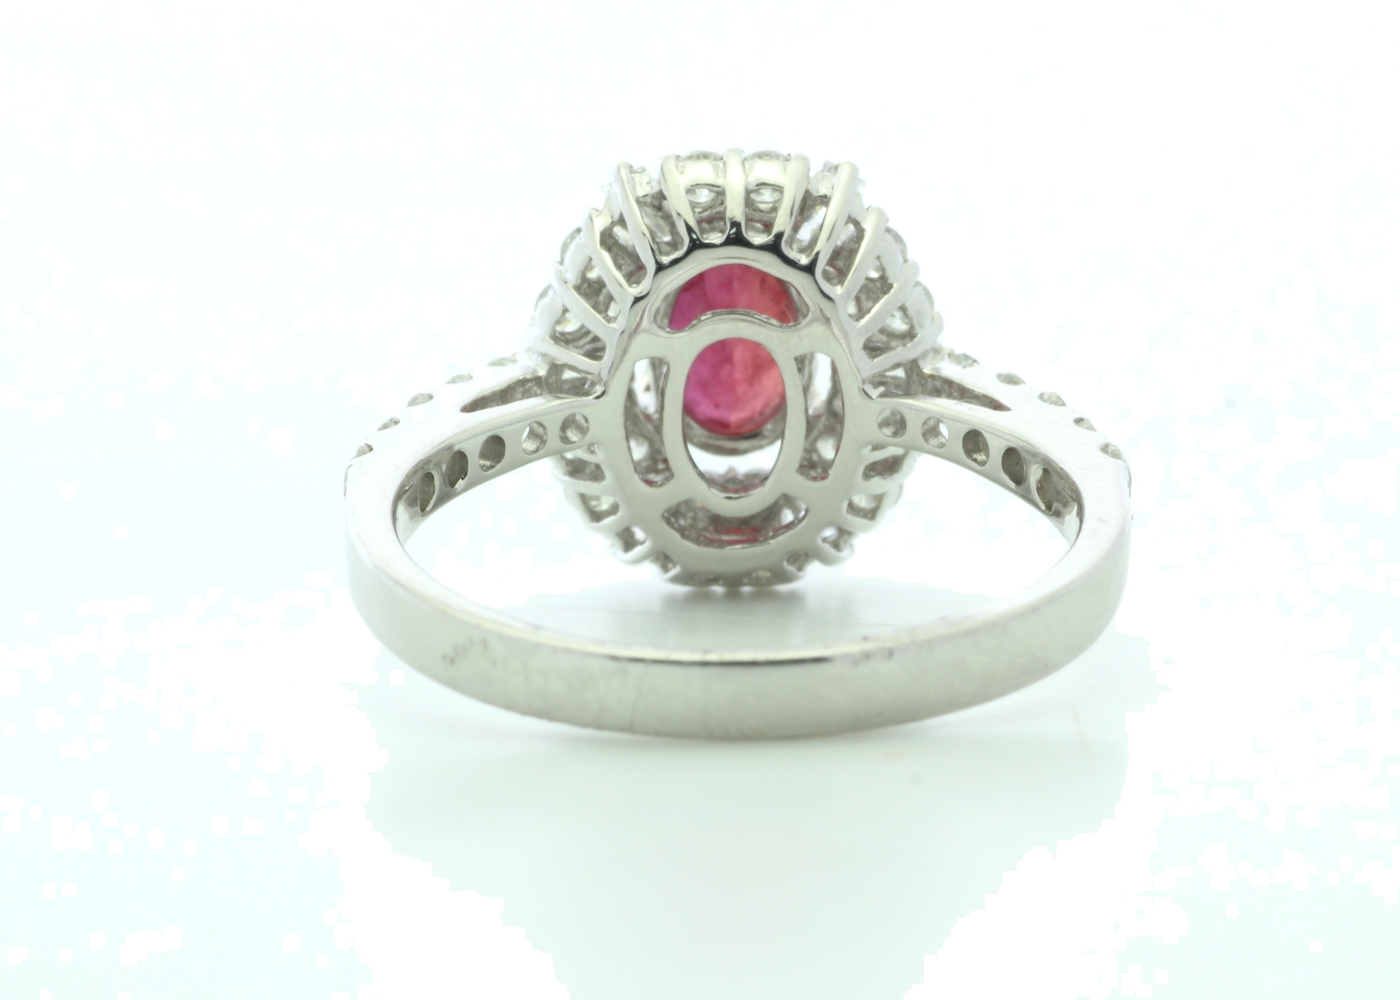 18ct White Gold Cluster Diamond and Ruby Ring (R0.86) 0.80 Carats - Image 3 of 5